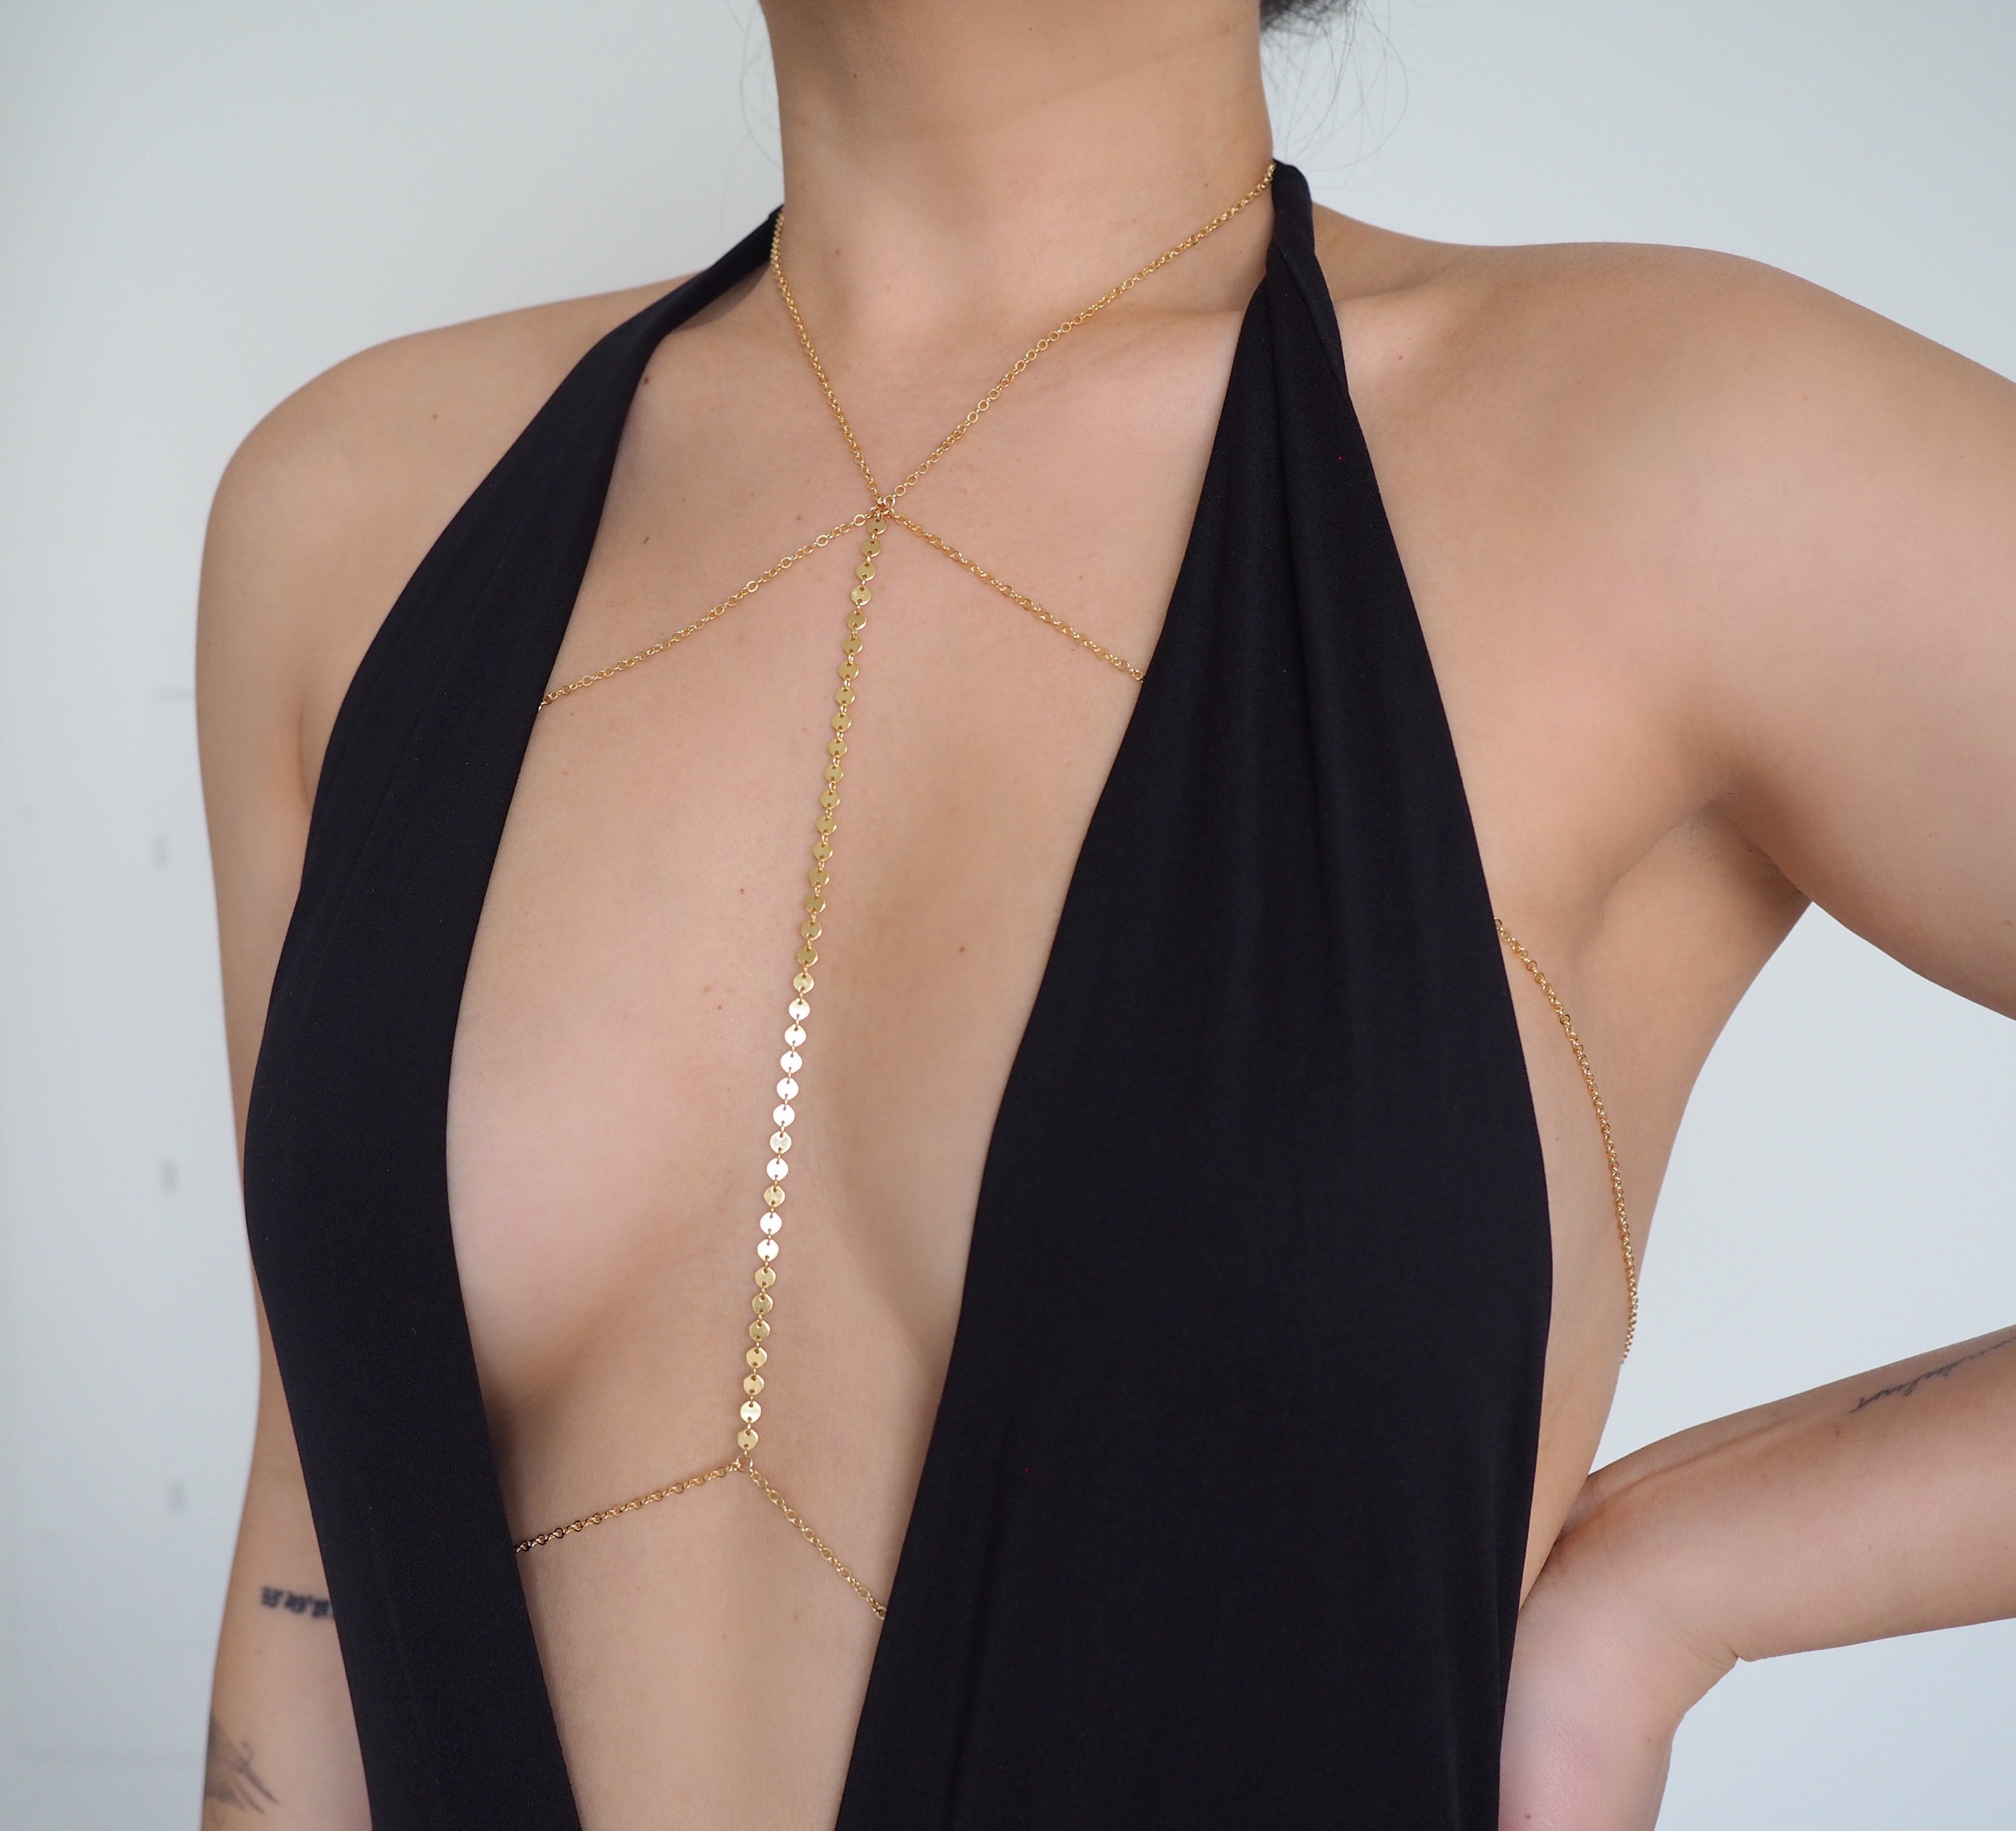 Stainless Steel or Gold Filled Double Layer Chain Bra Body Chain in Gold or  Silver, Handmade, Non-tarnish -  Canada